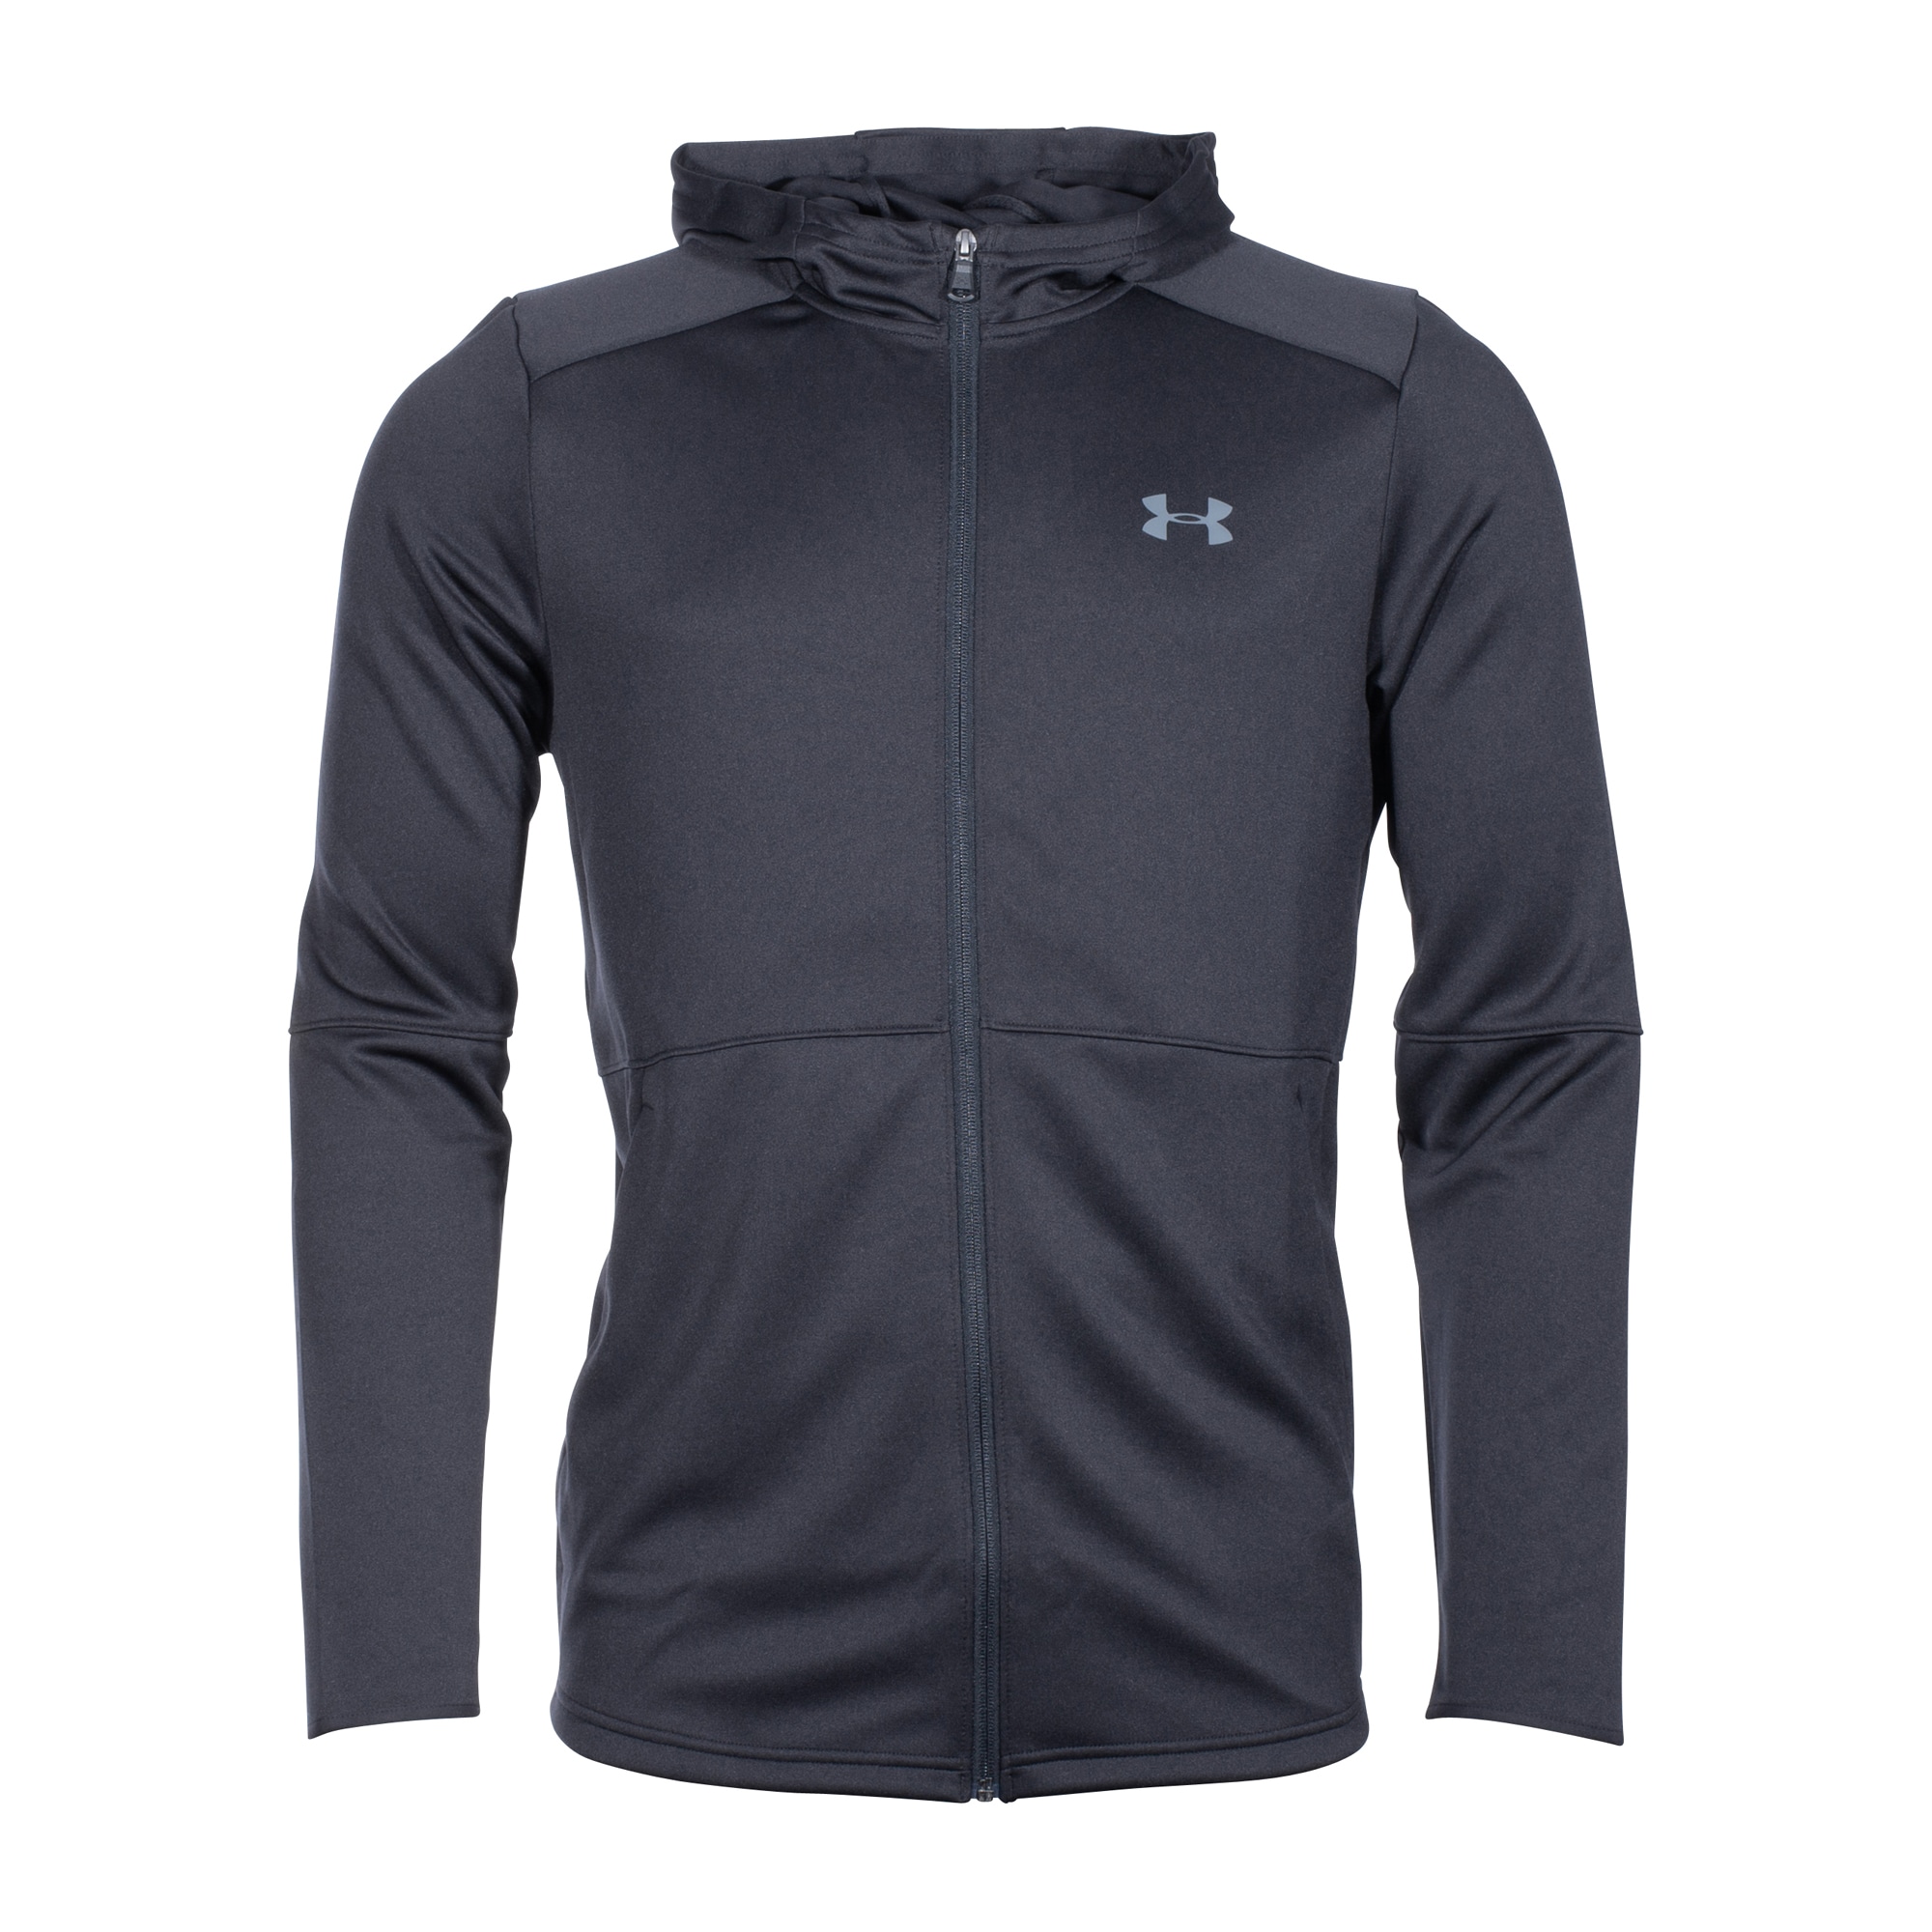 Purchase the Under Armour MK1 Warmup FZ Hoodie black by ASMC